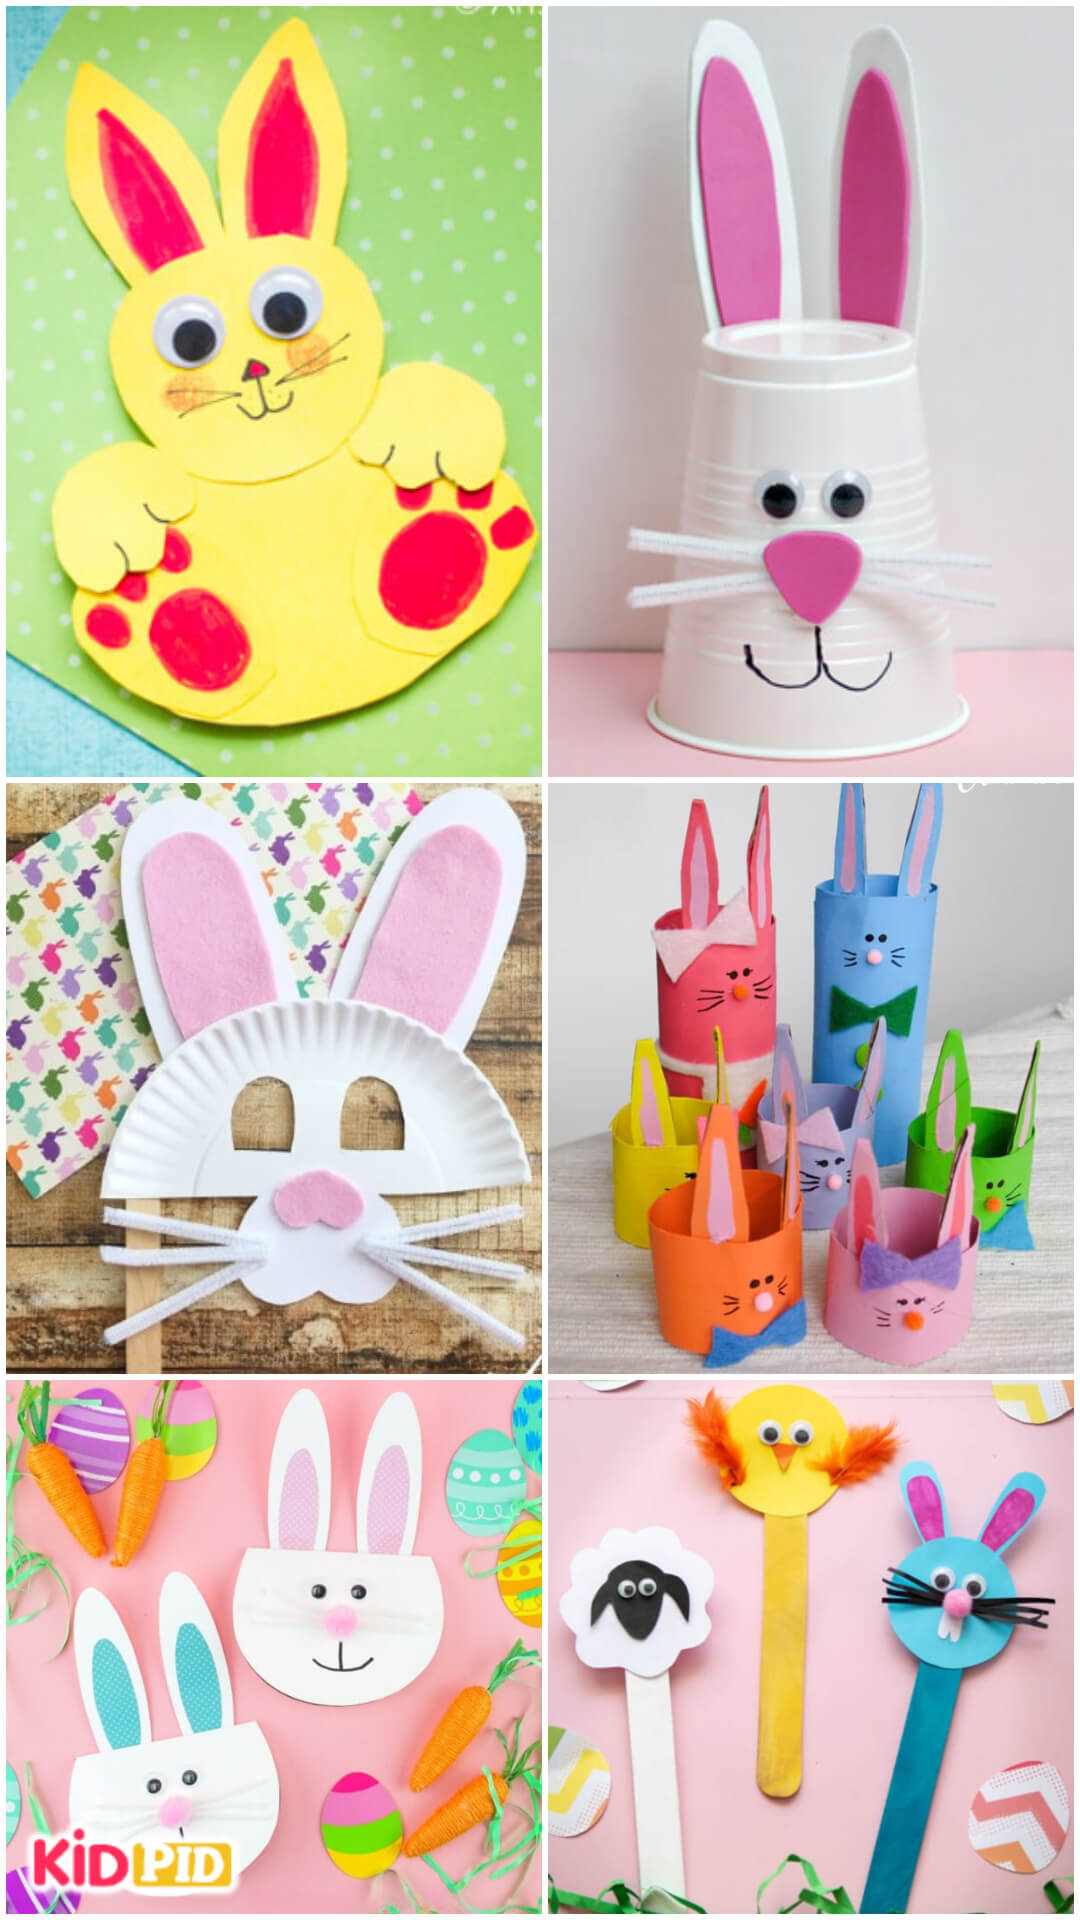 Bunny Crafts for Kids to Make at Home